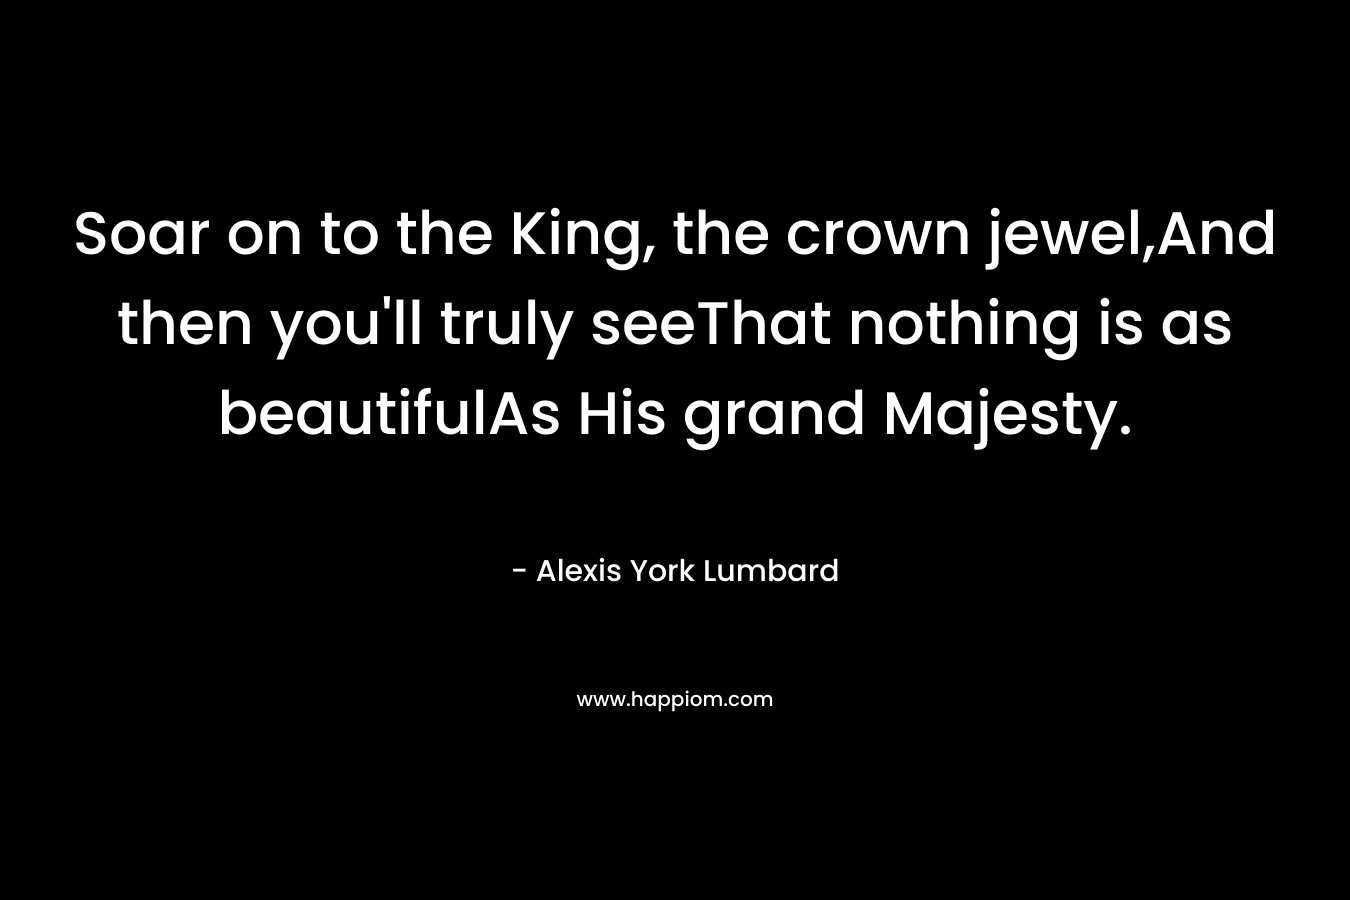 Soar on to the King, the crown jewel,And then you'll truly seeThat nothing is as beautifulAs His grand Majesty.